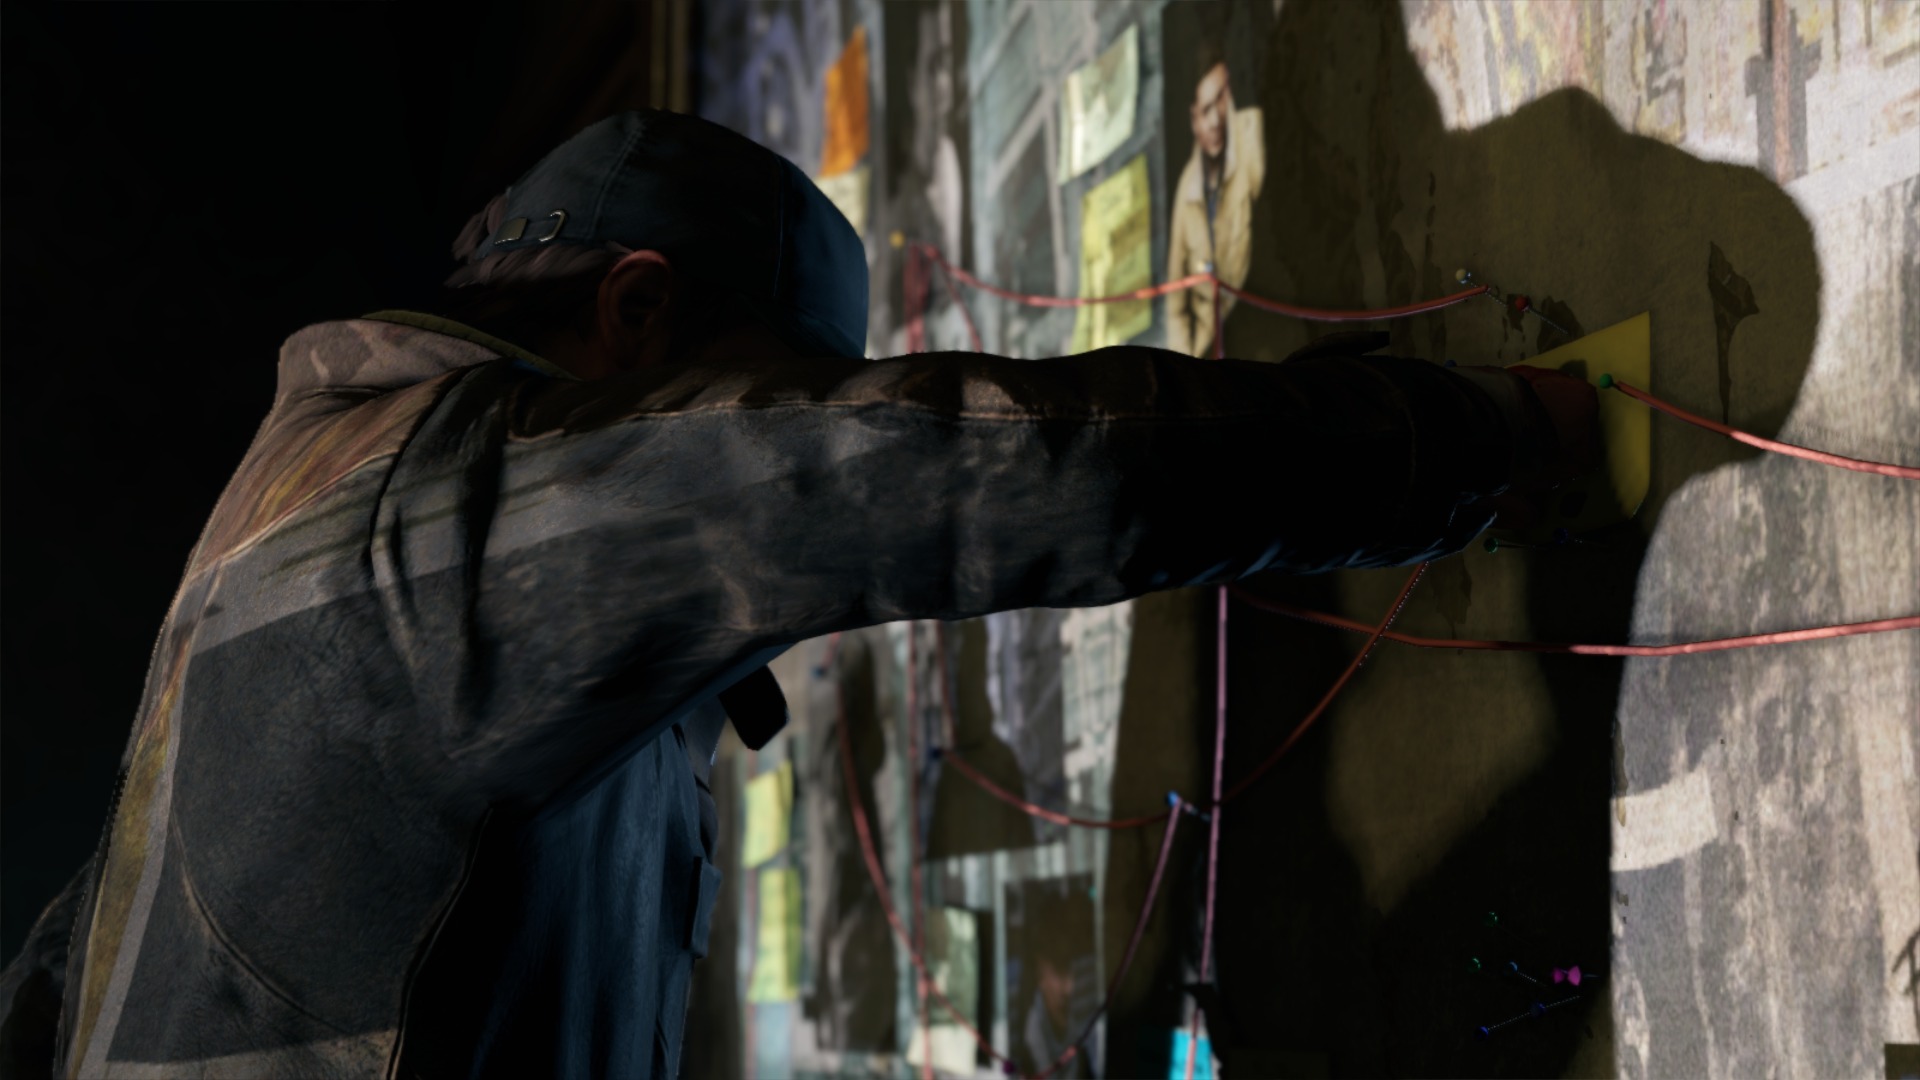 WATCH_DOGS™_20140528004255